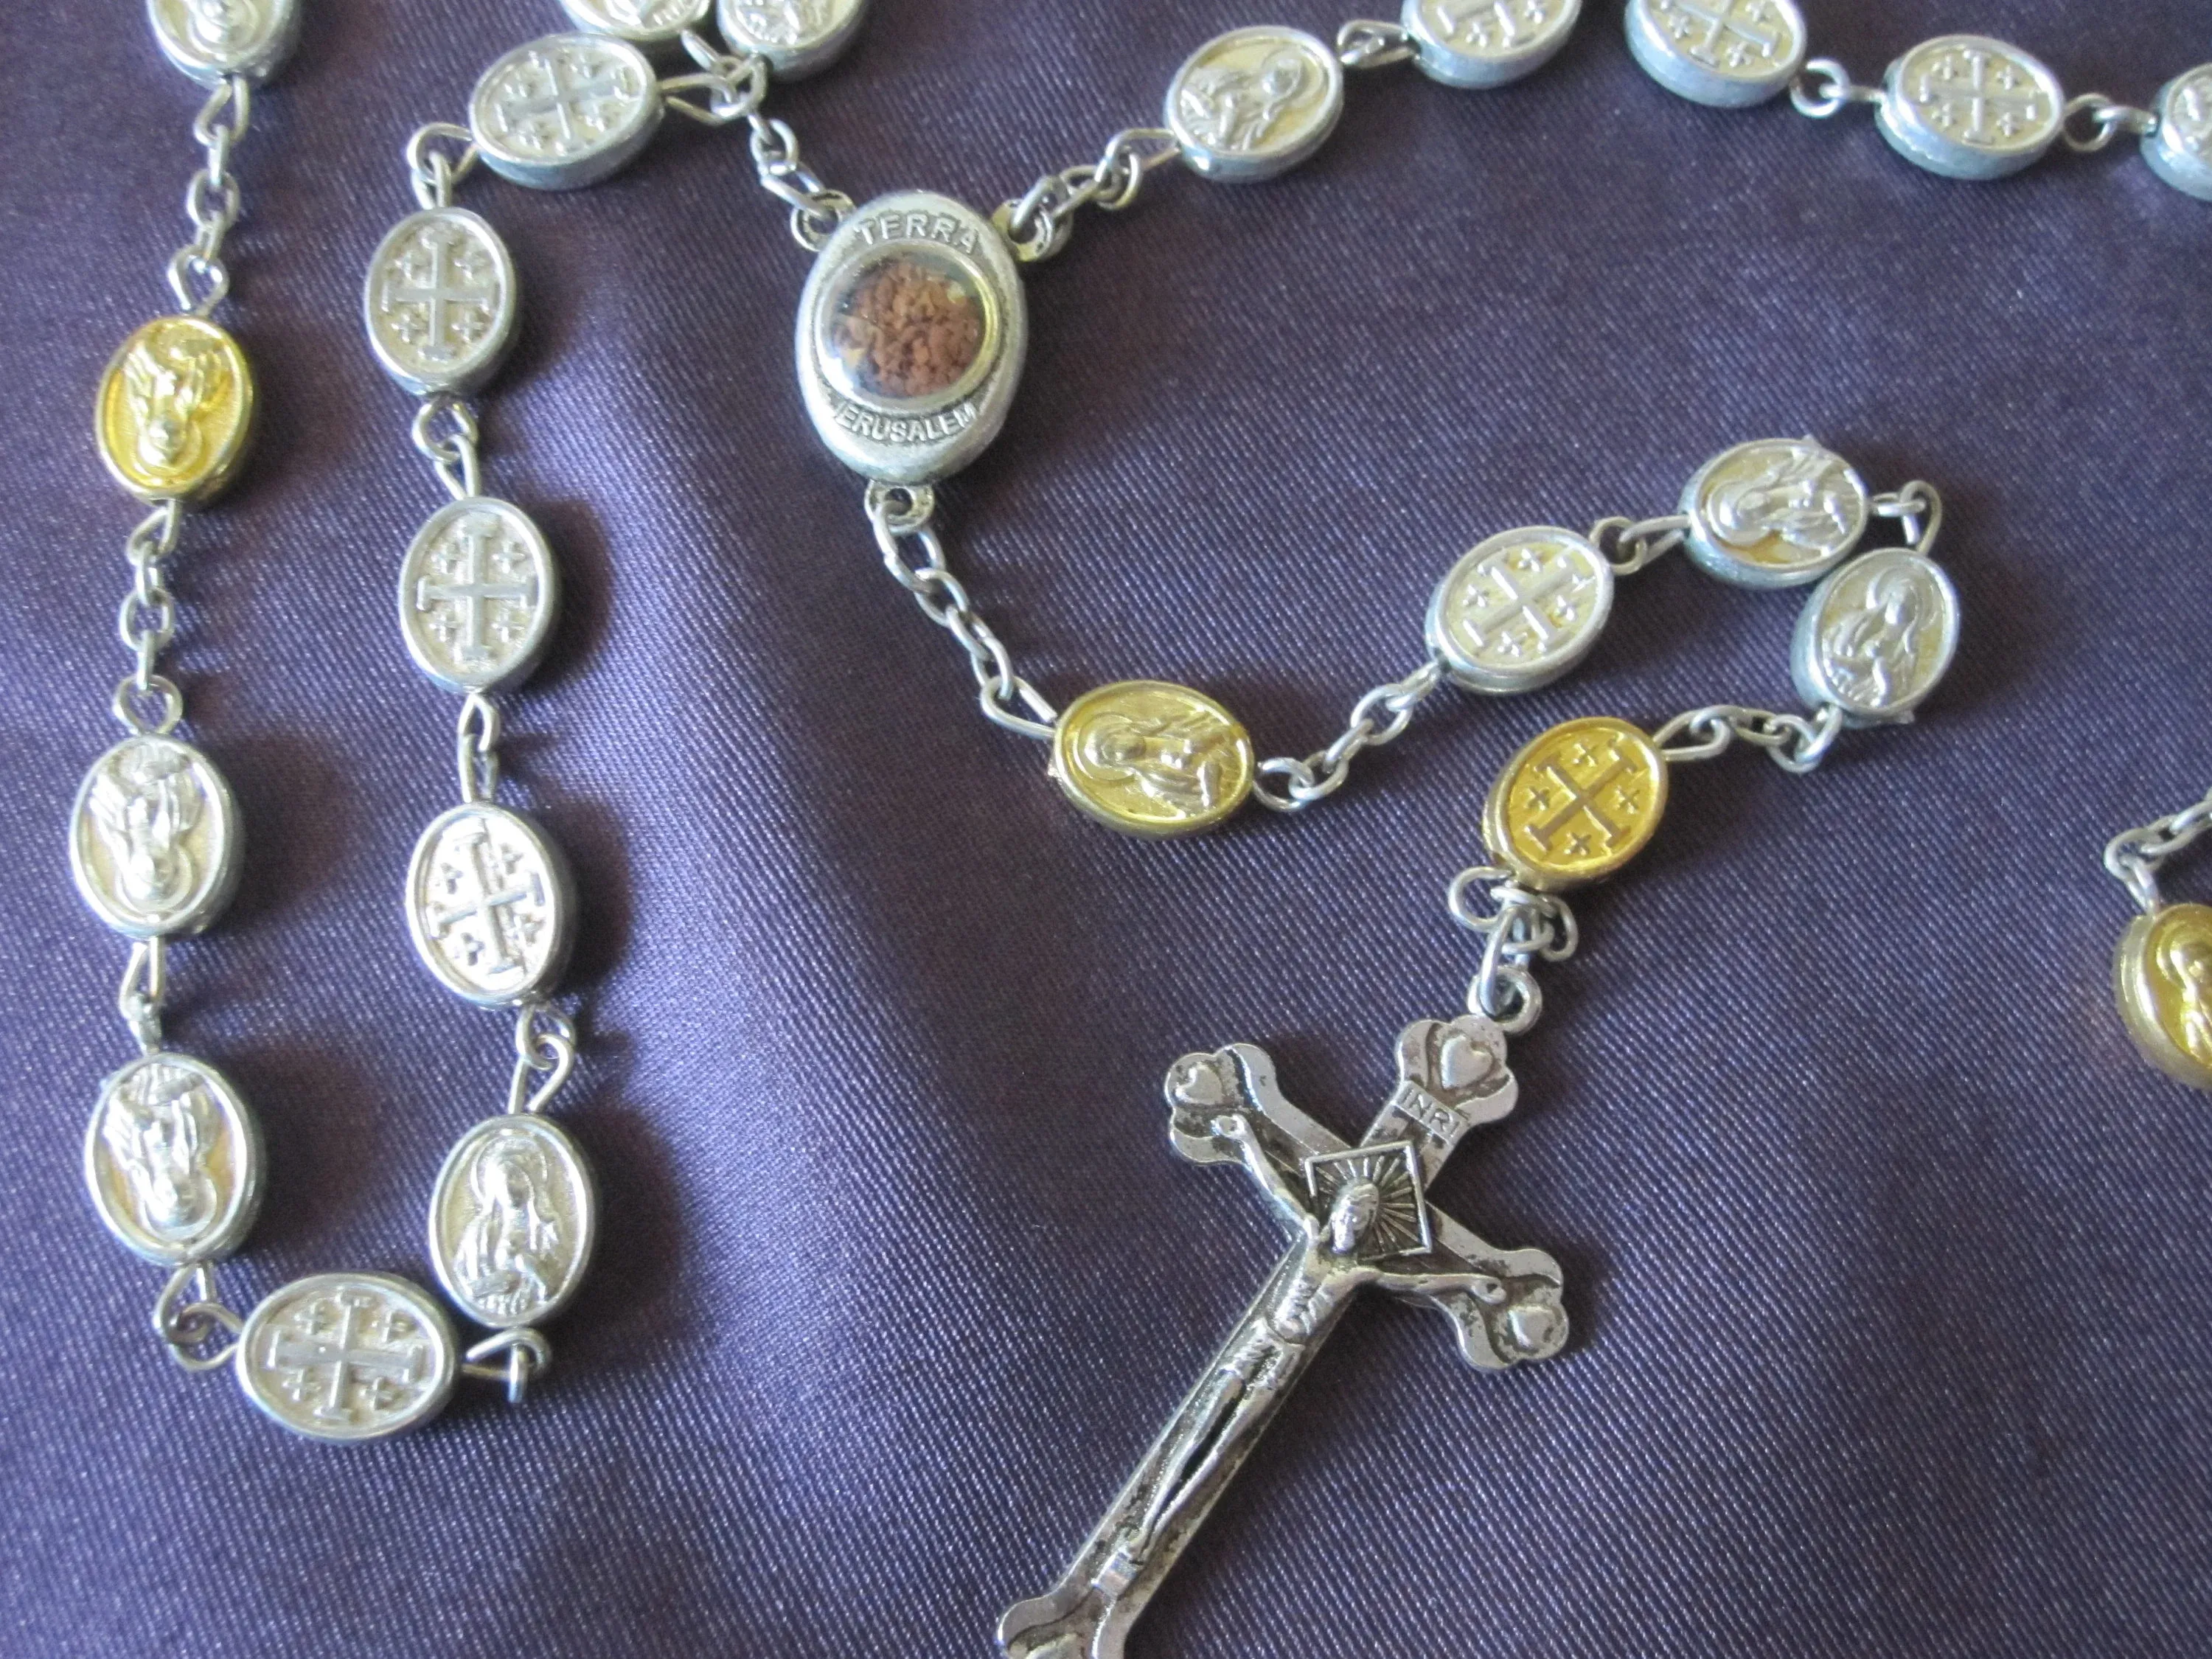 Jerusalem Rosaries in Israel, middle_east | Souvenirs - Country Helper